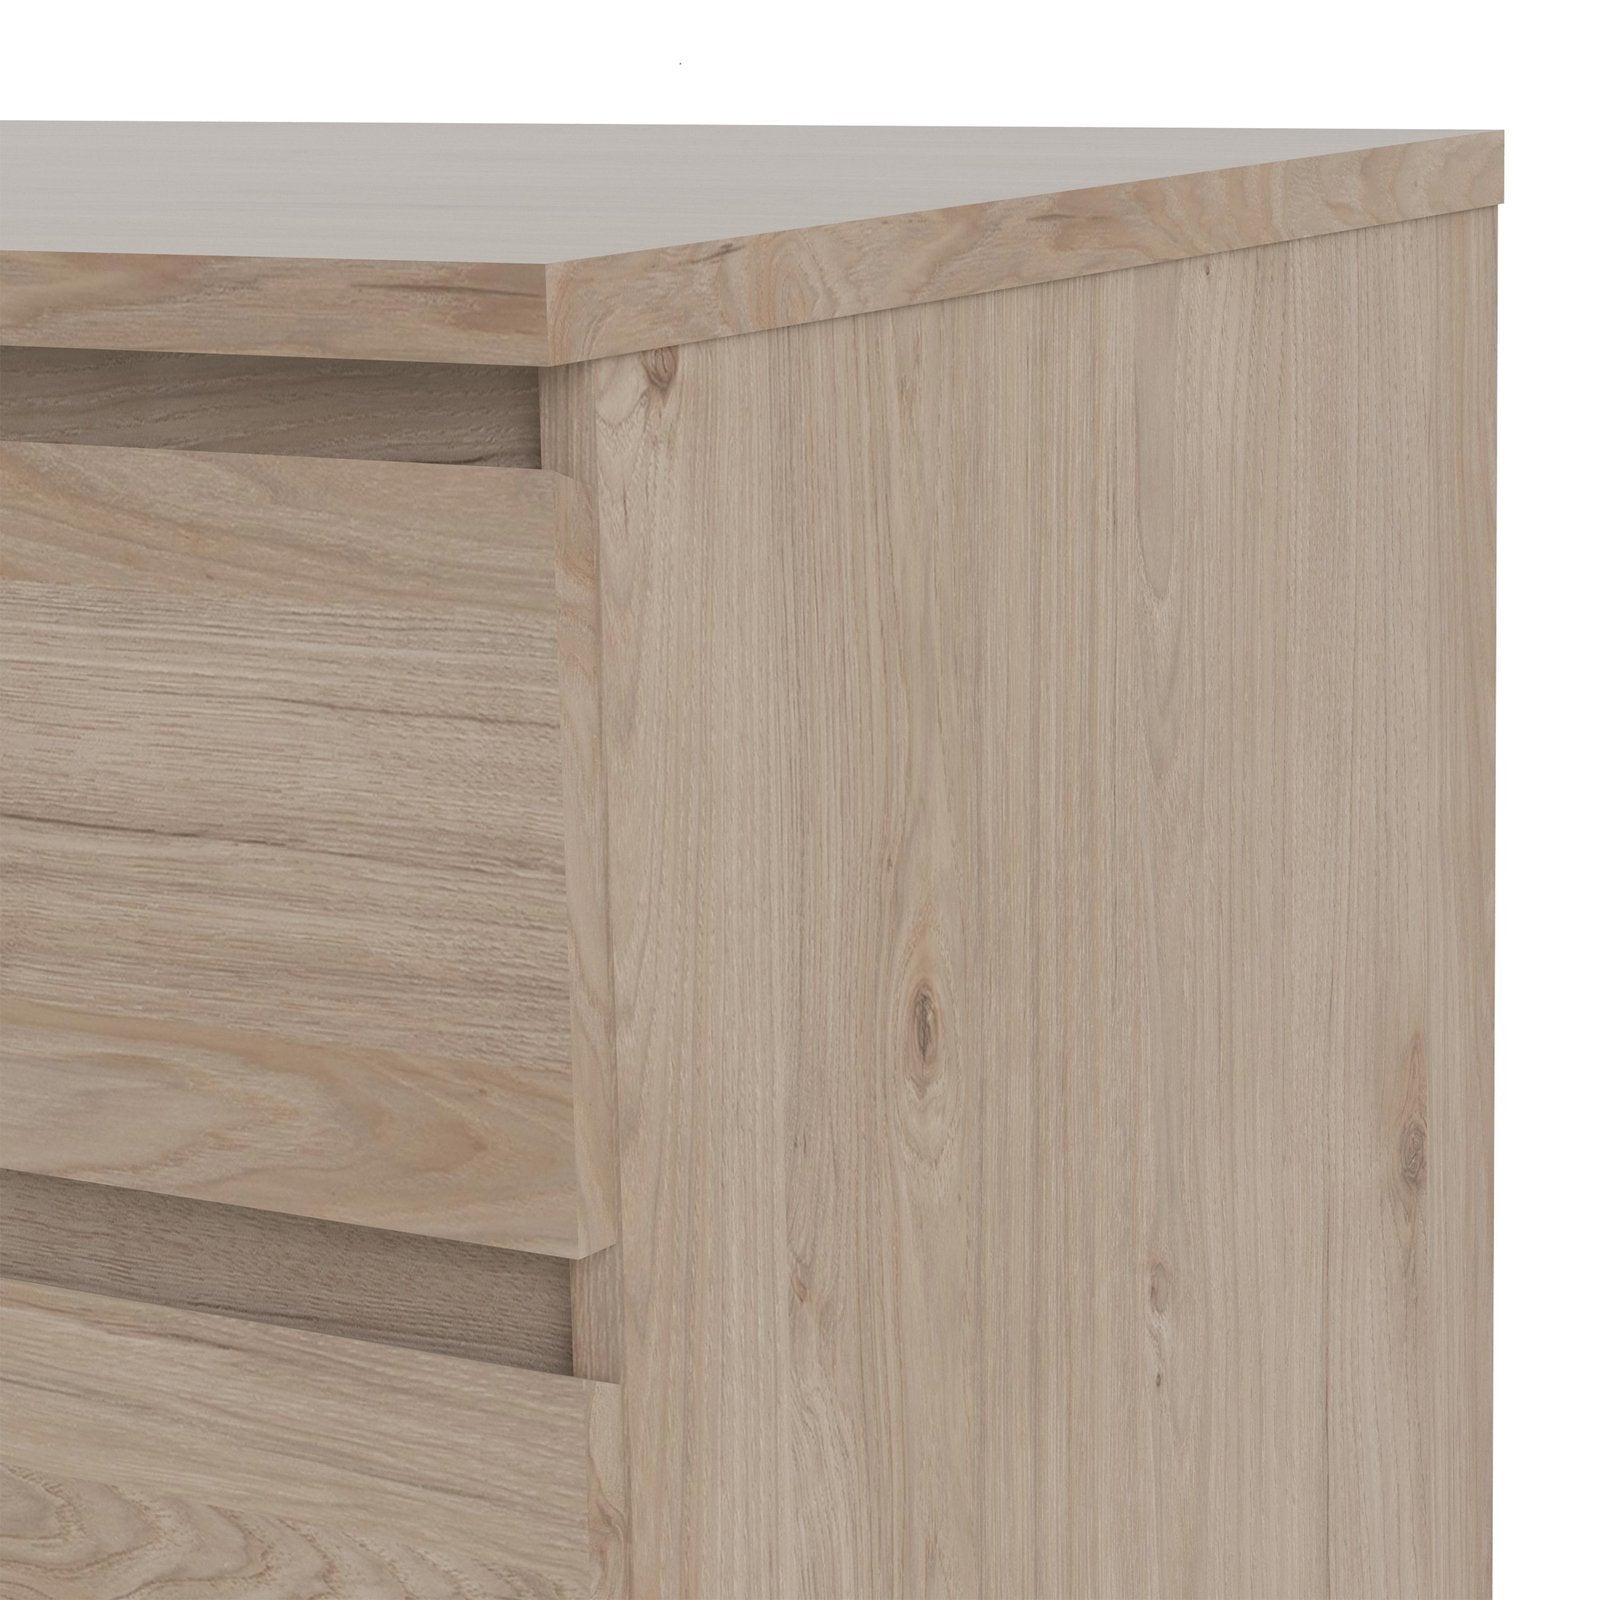 Naia Chest of 5 Drawers